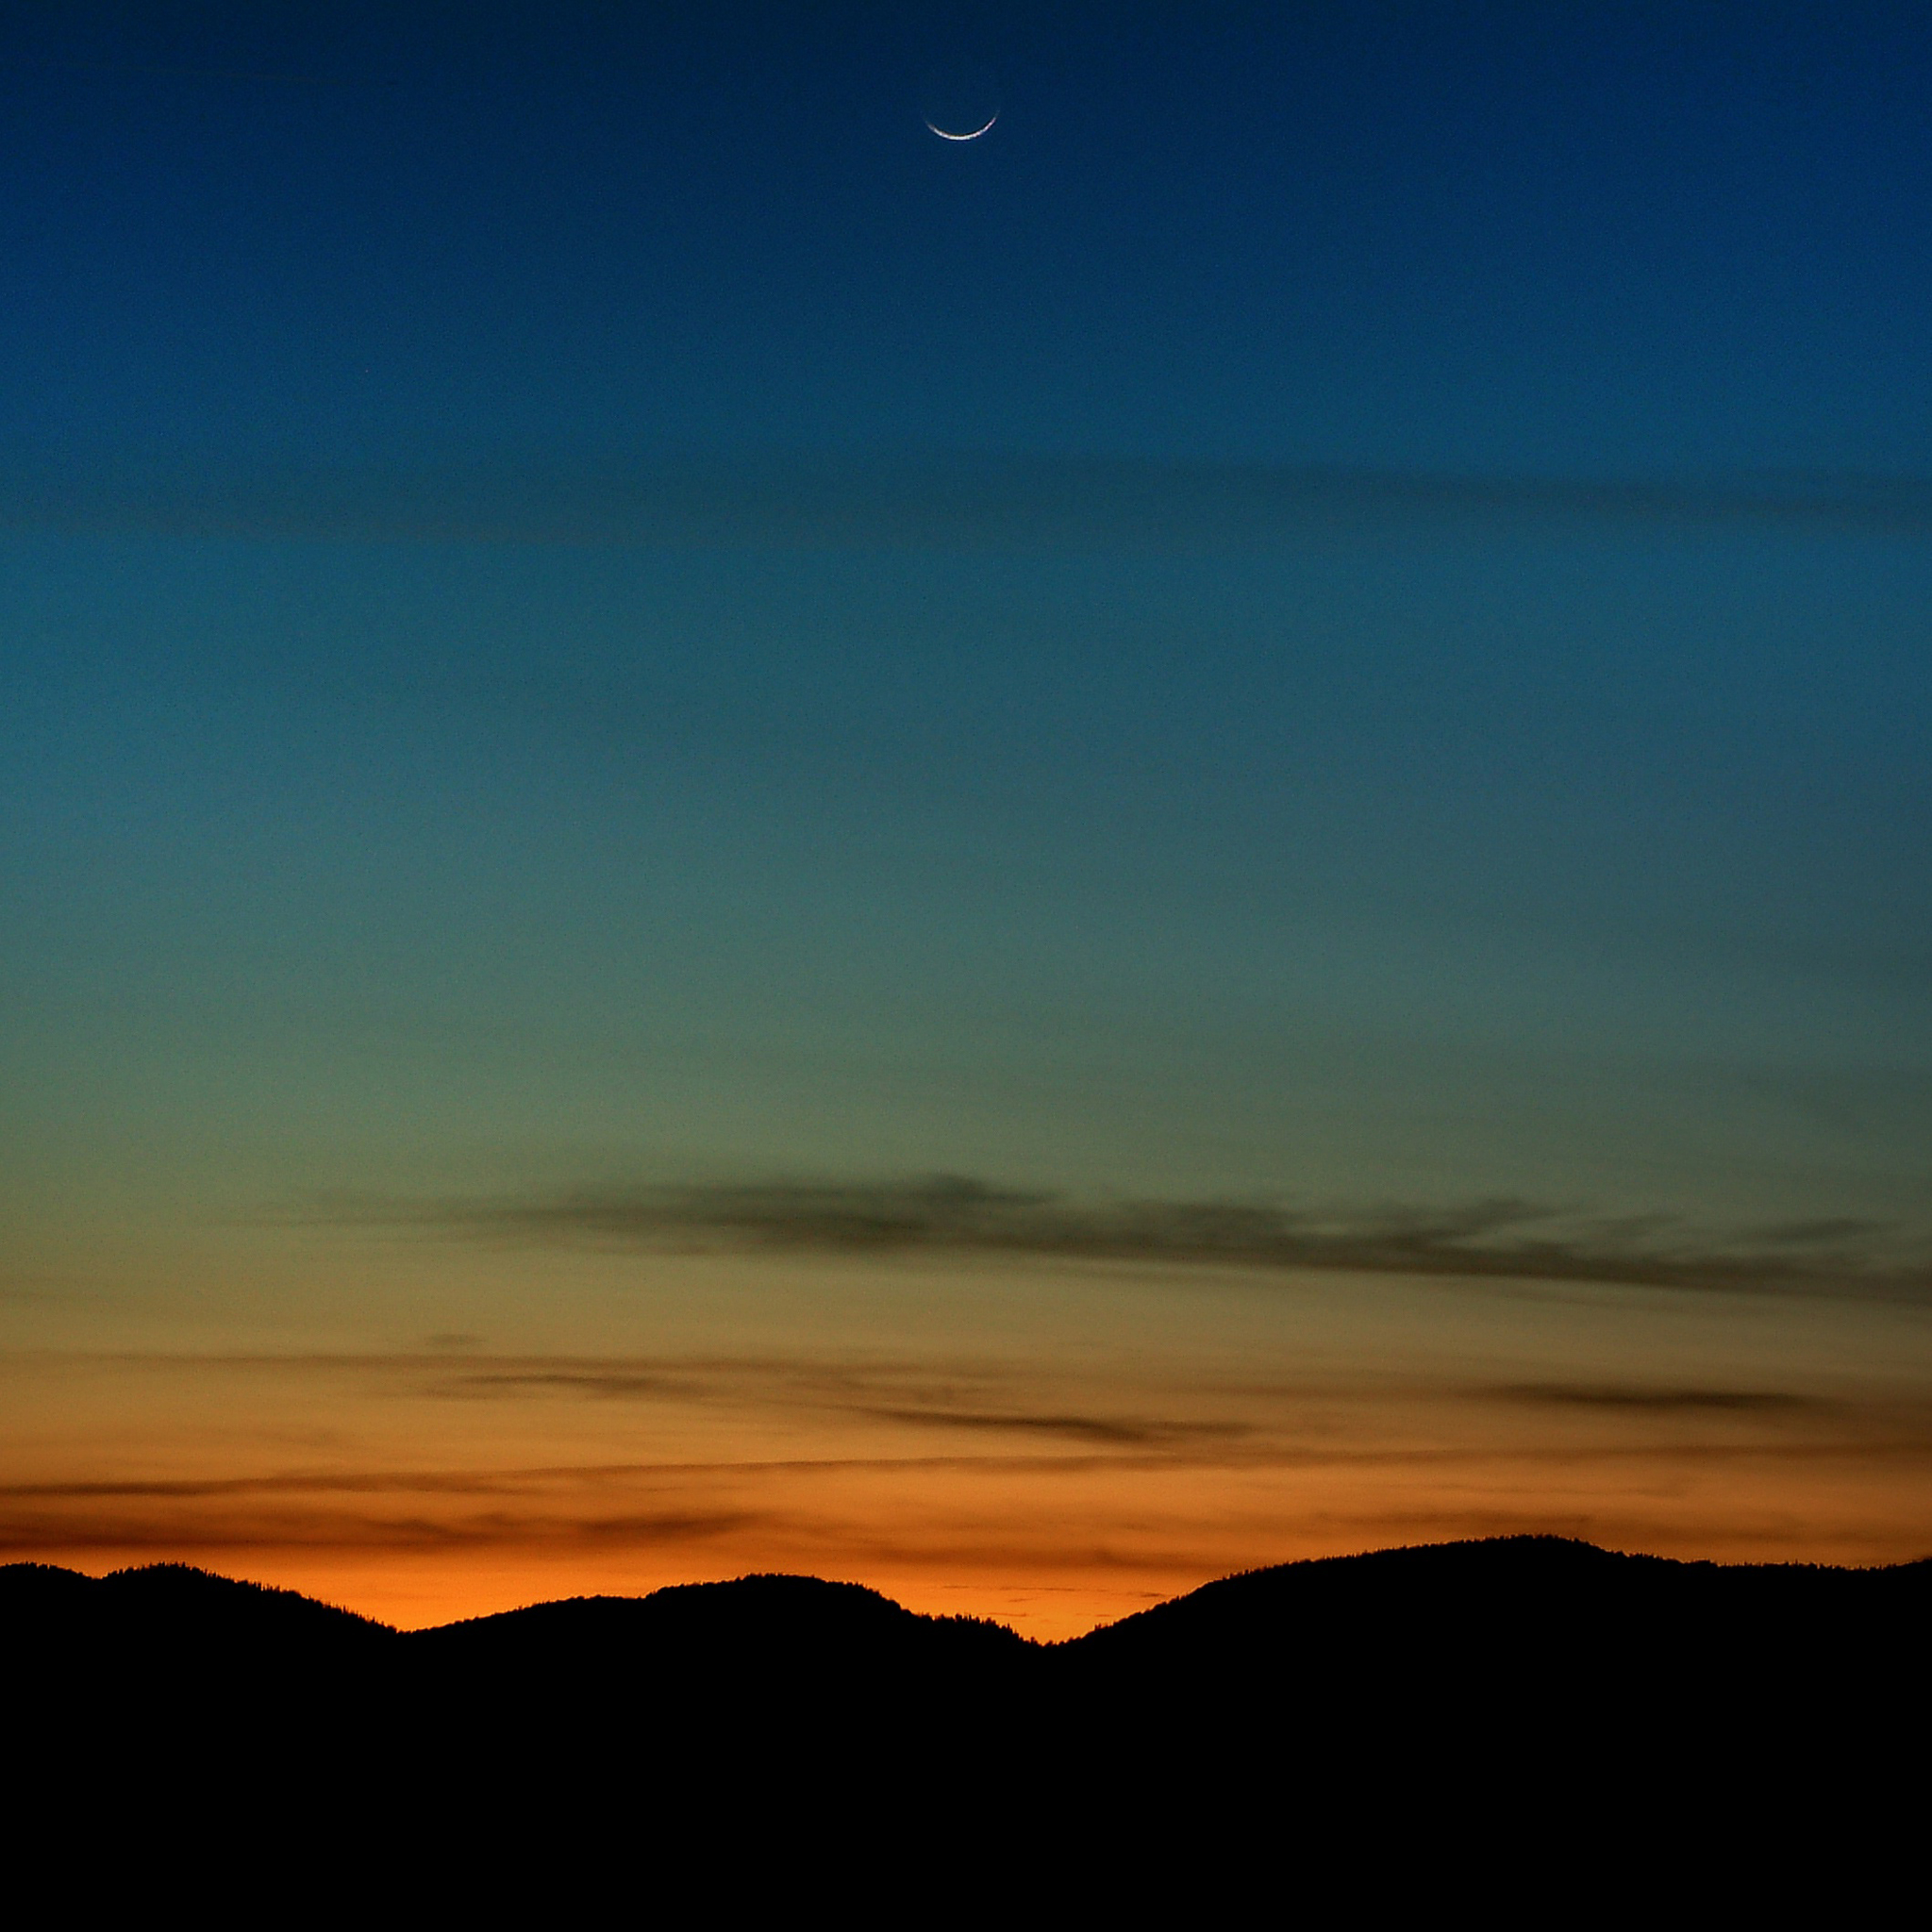 tahoe sunsets - under a new spring moon ipad wallpaper